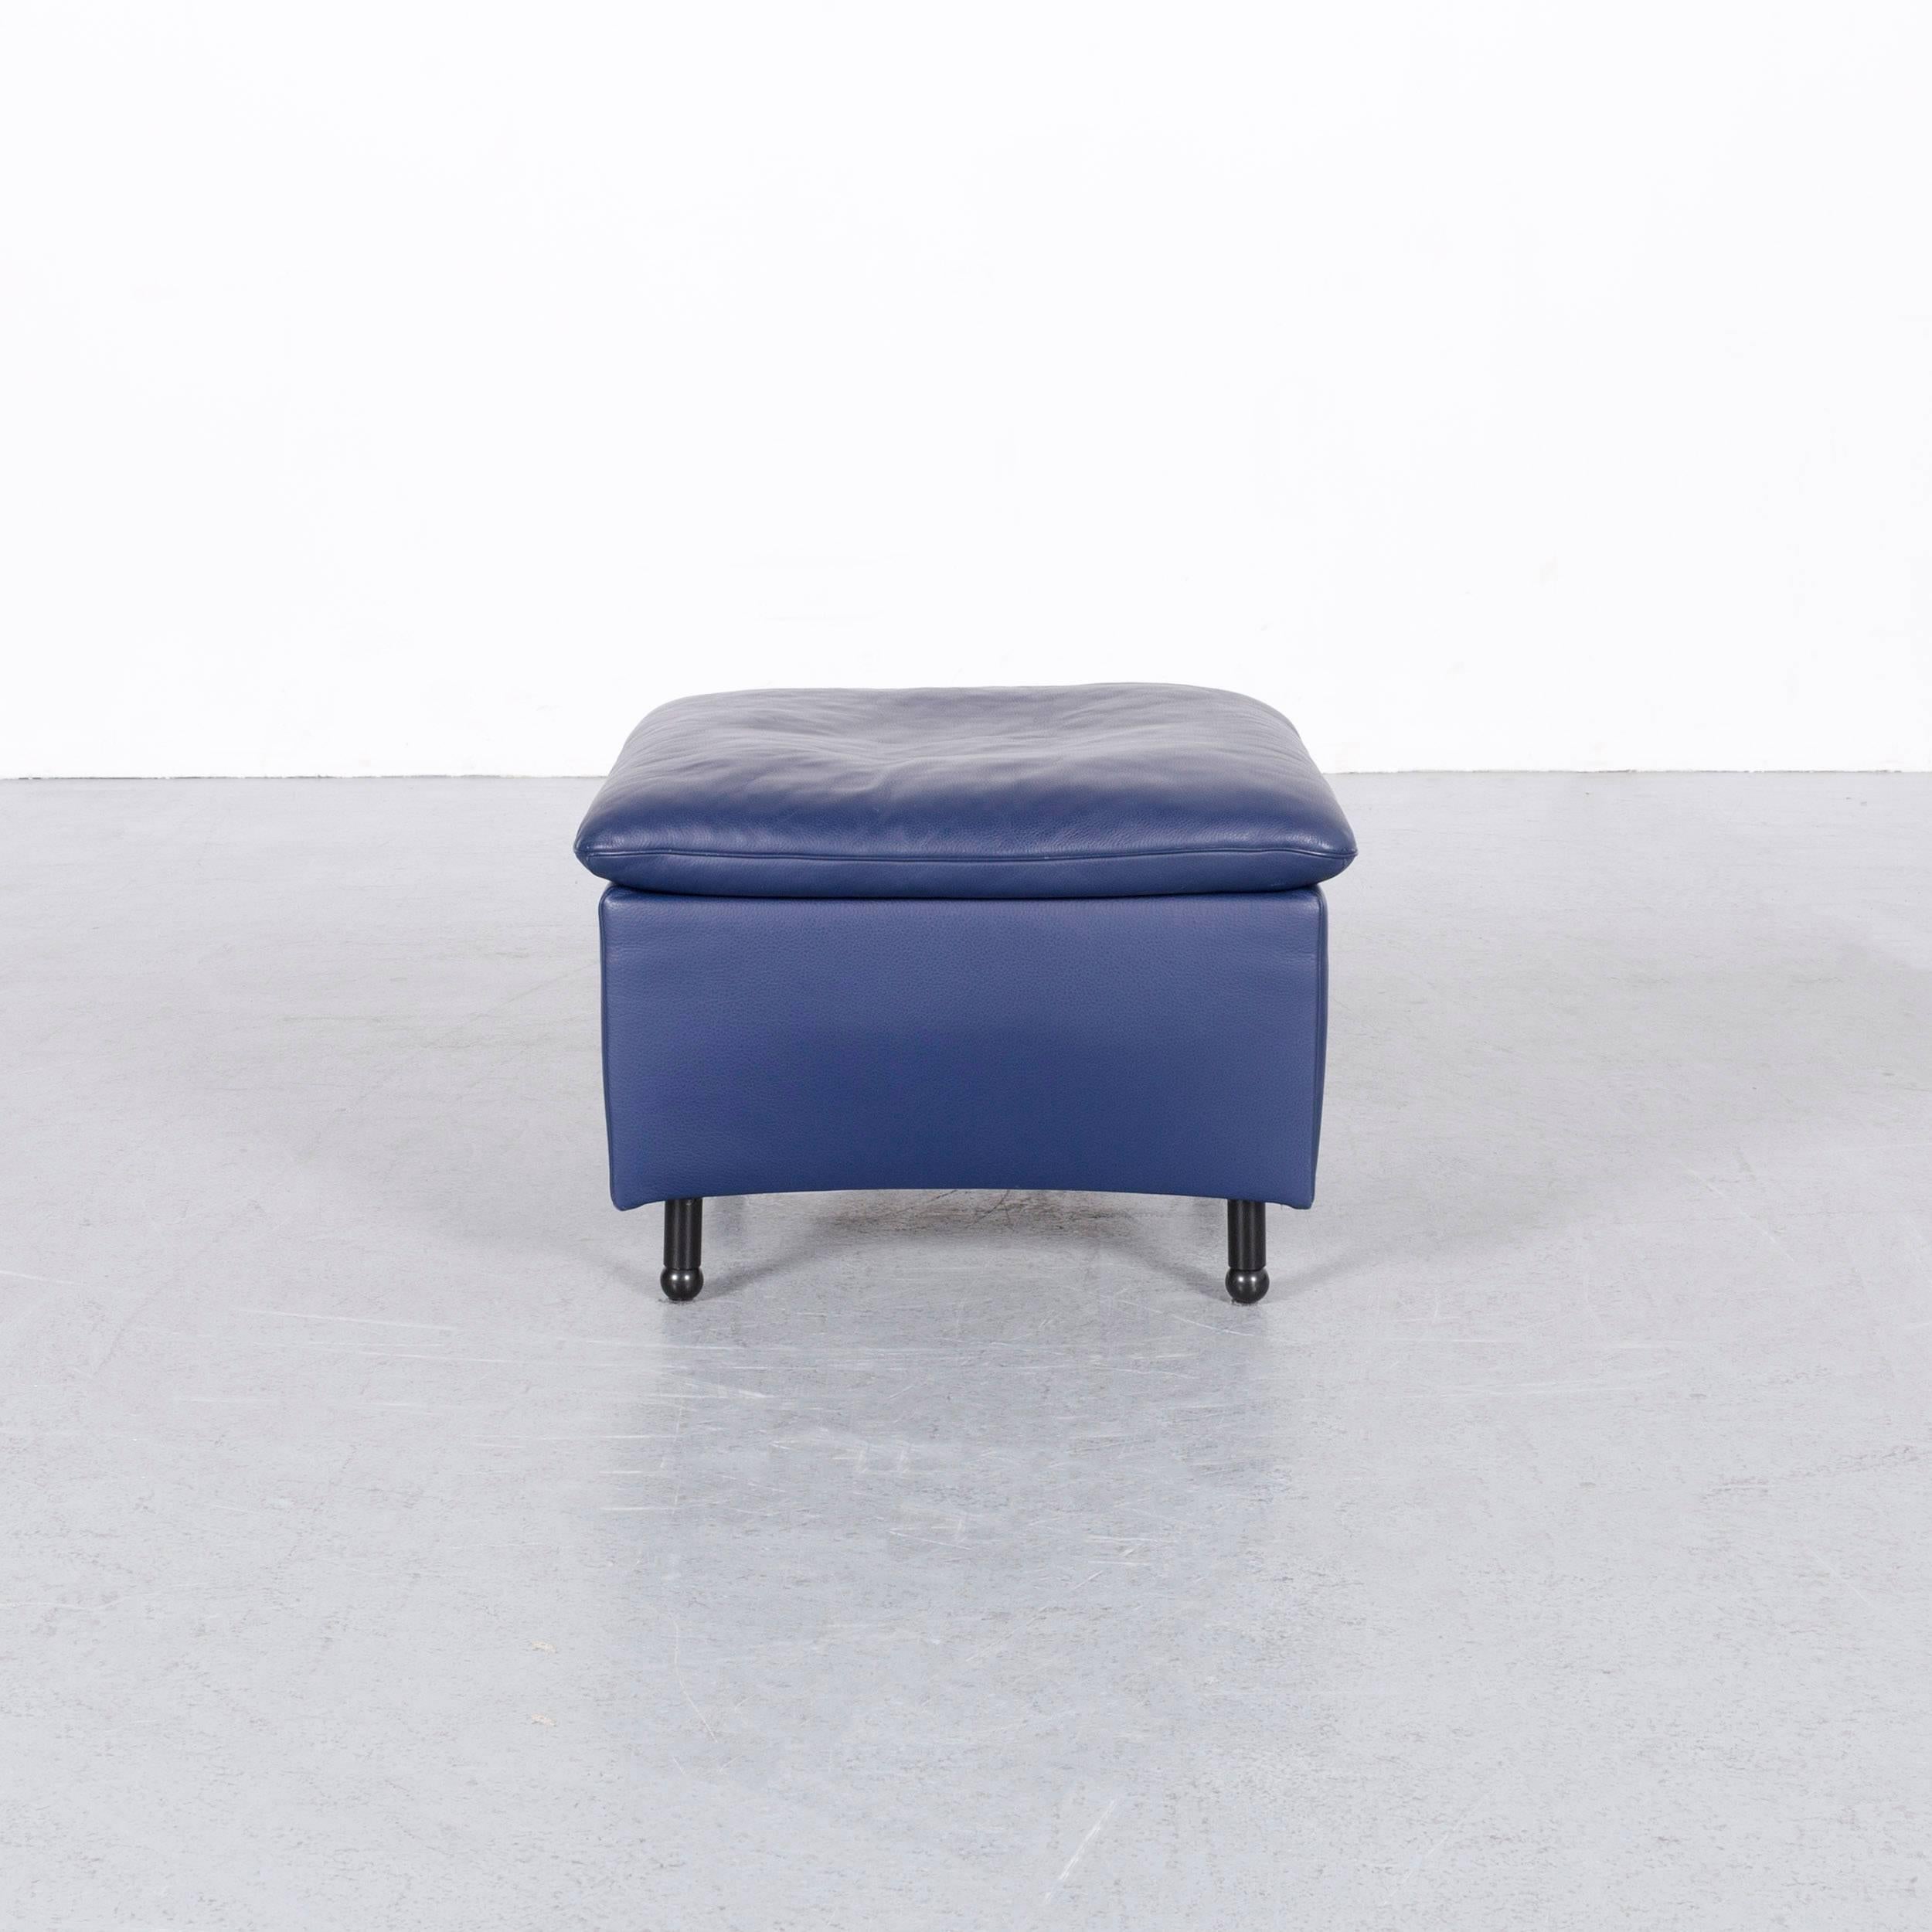 We bring to you an De Sede DS 23 leather foot-stool blue bench.